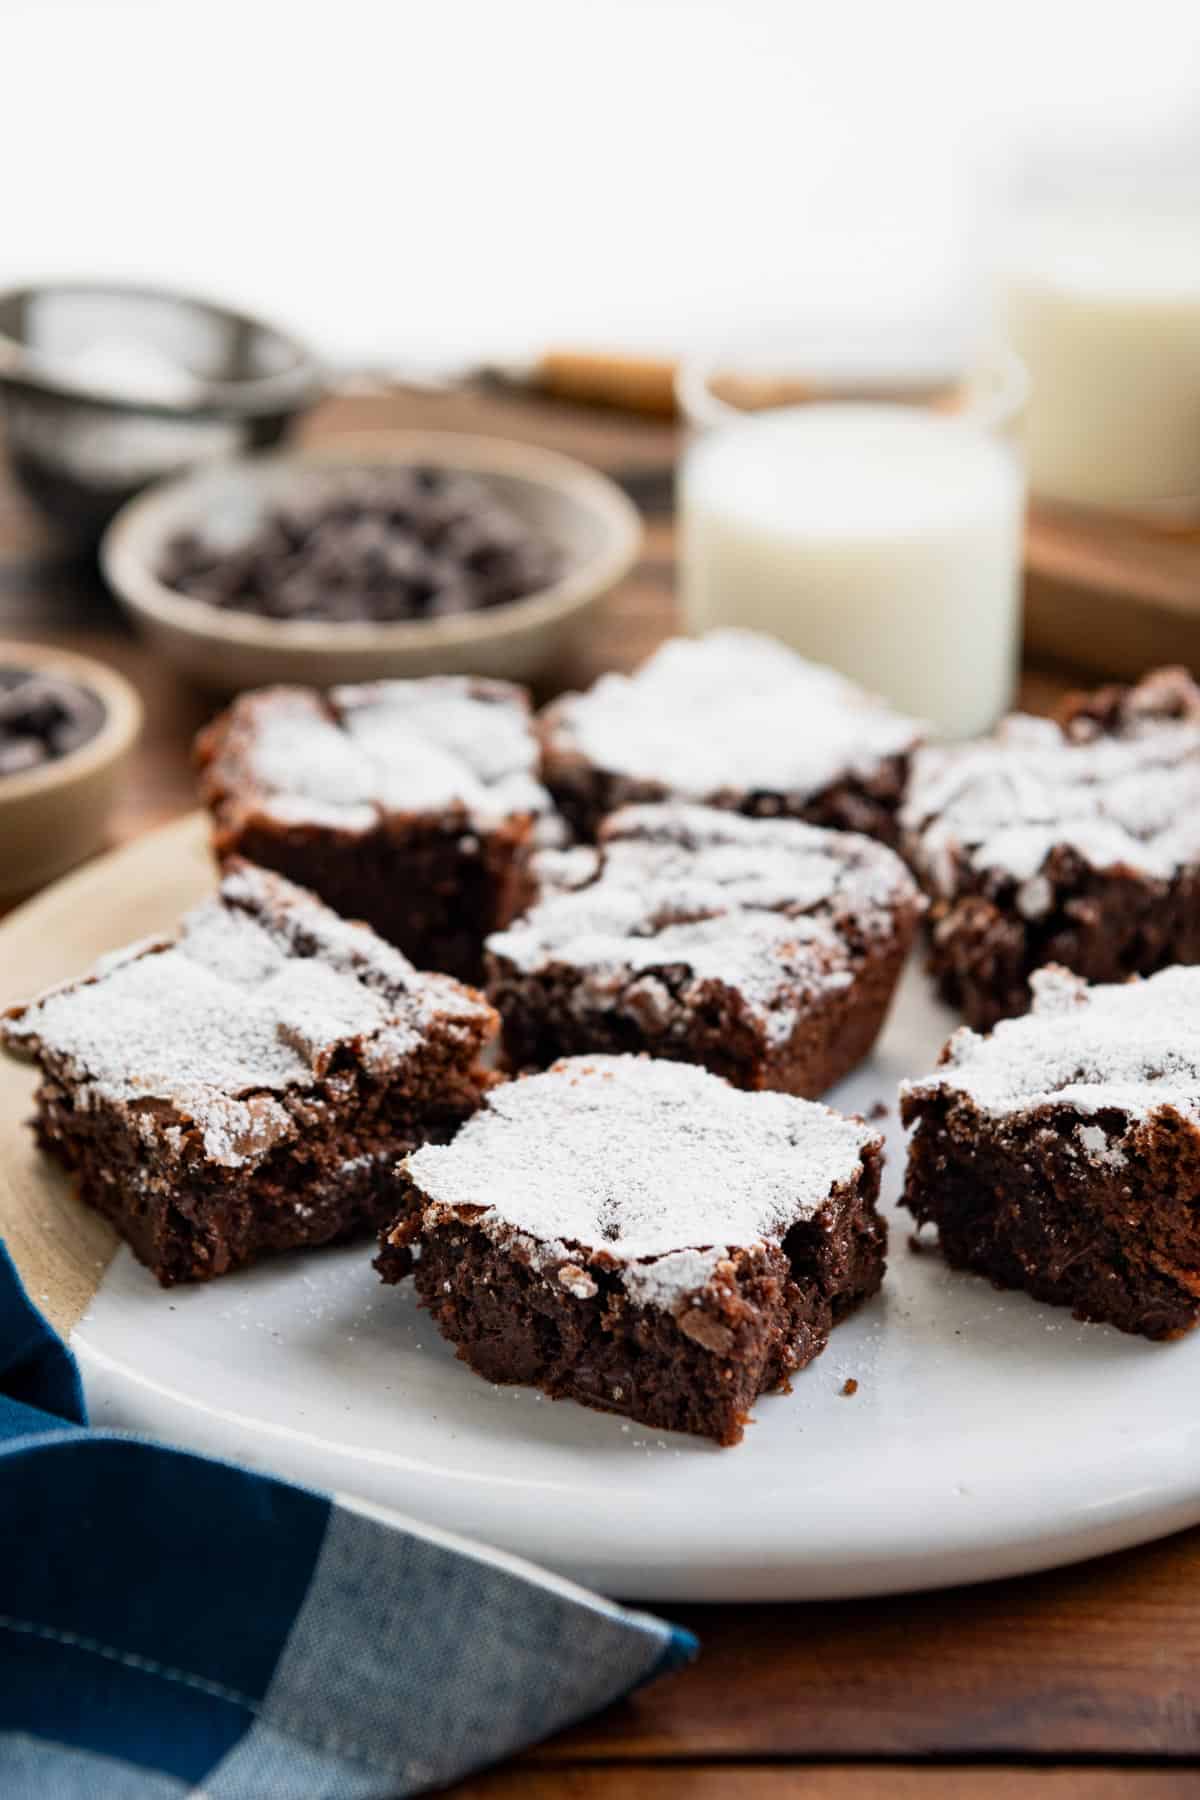 Tray of homemade brownies on a wooden table.